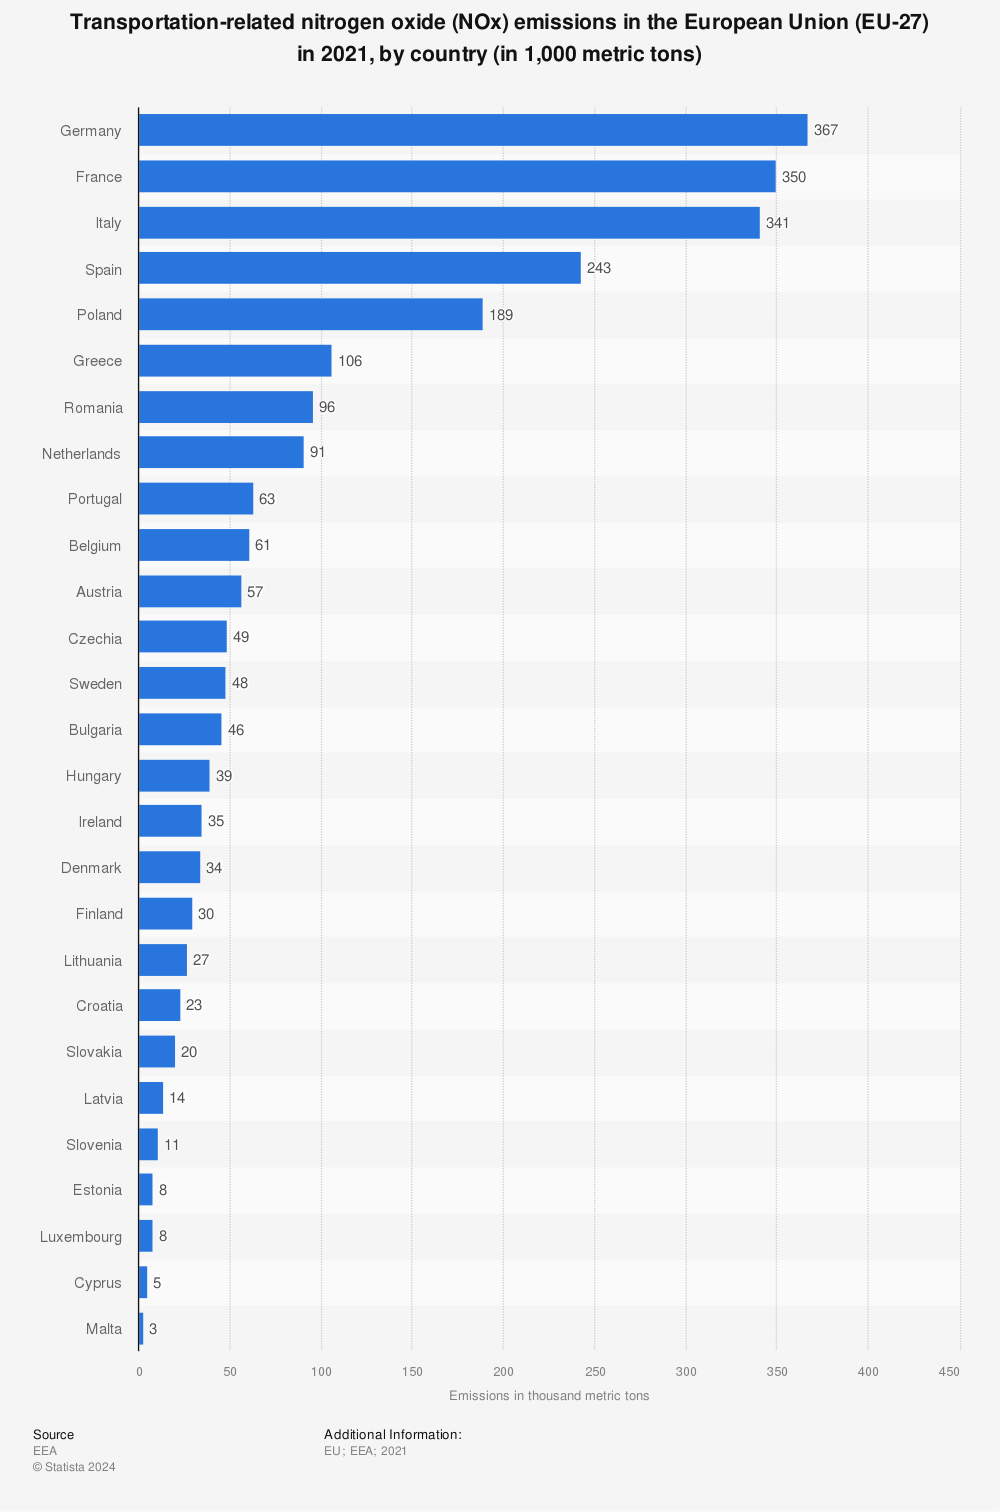 Statistic: Transportation-related nitrogen oxide (NOx) emissions in the European Union (EU-27) in 2020, by country (in 1,000 metric tons) | Statista